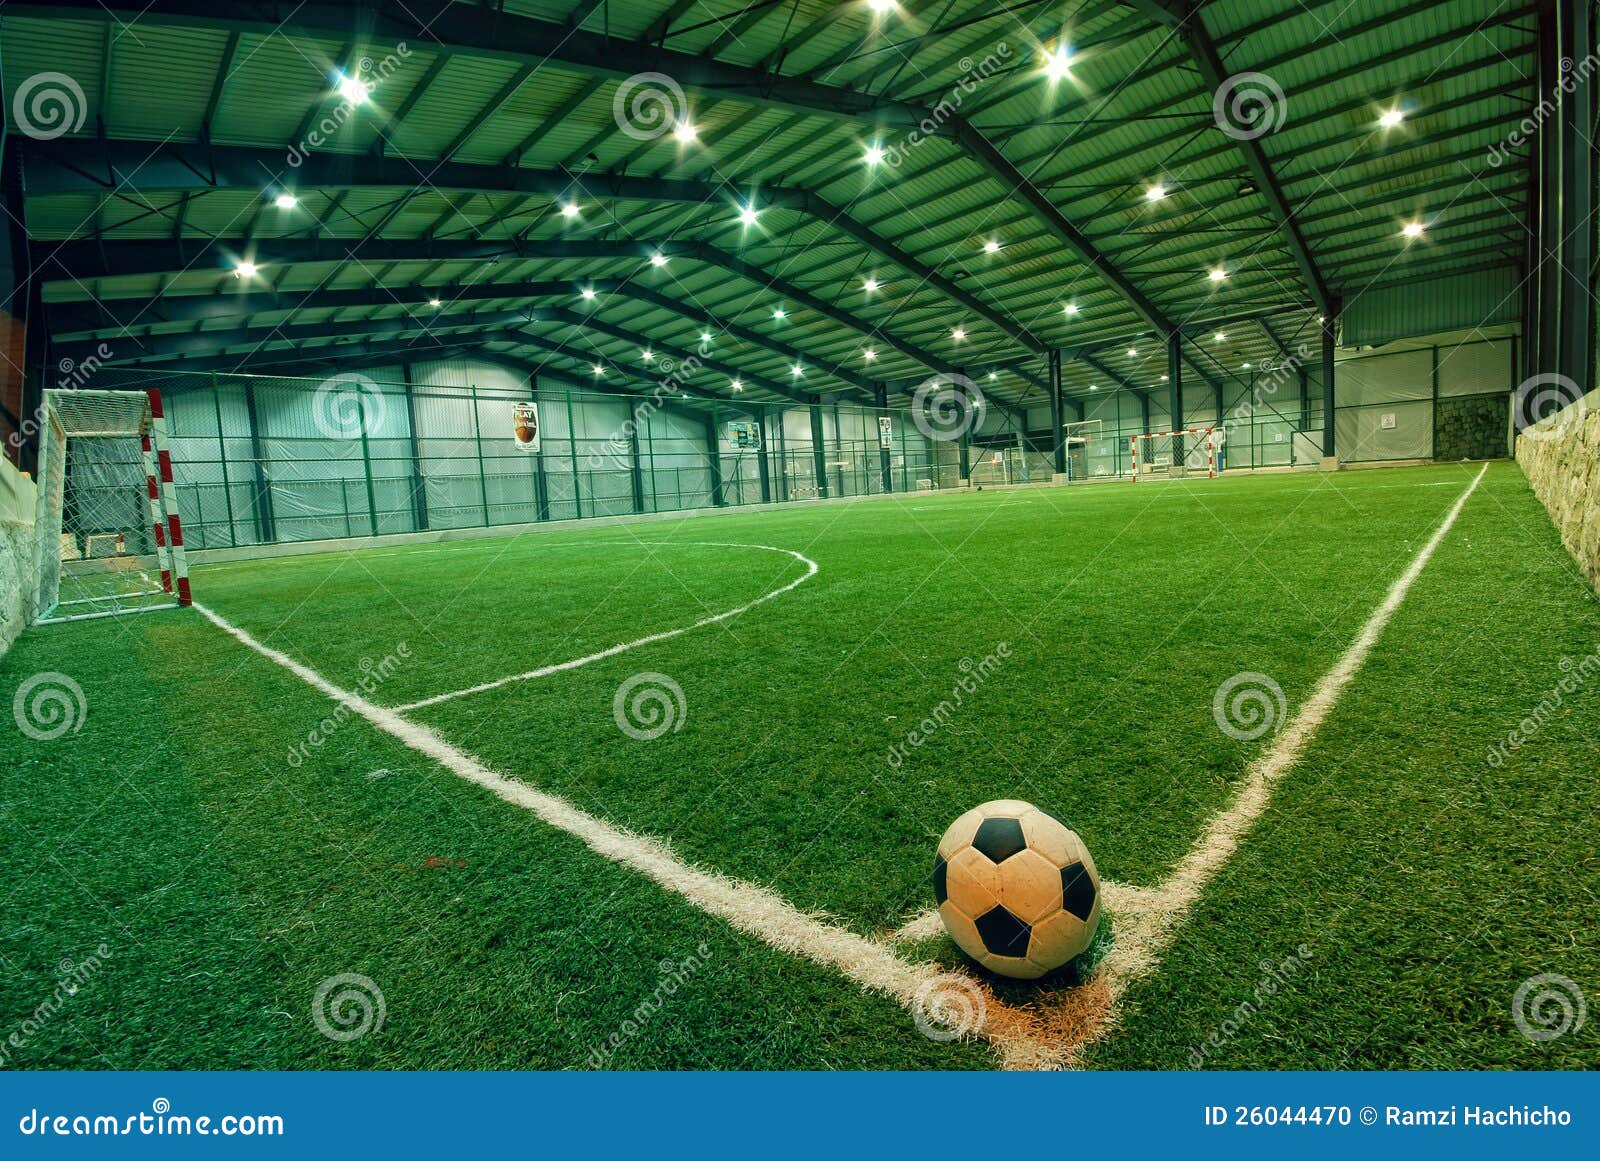 soccer ball on green grass in an indoor playground